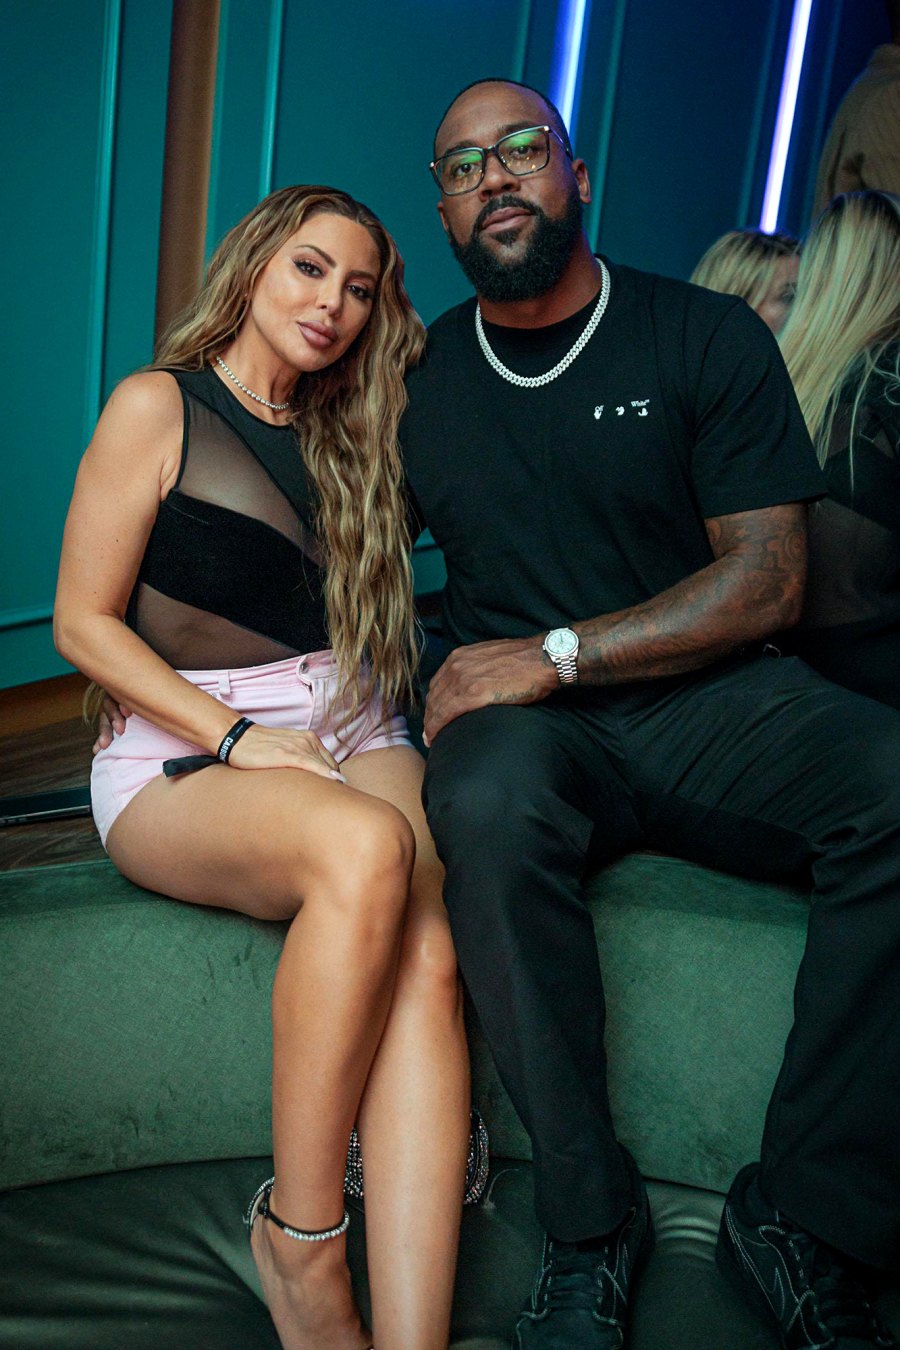 Lucky in Love! Larsa Pippen and BF Marcus Jordan Cuddle at F1 Bash